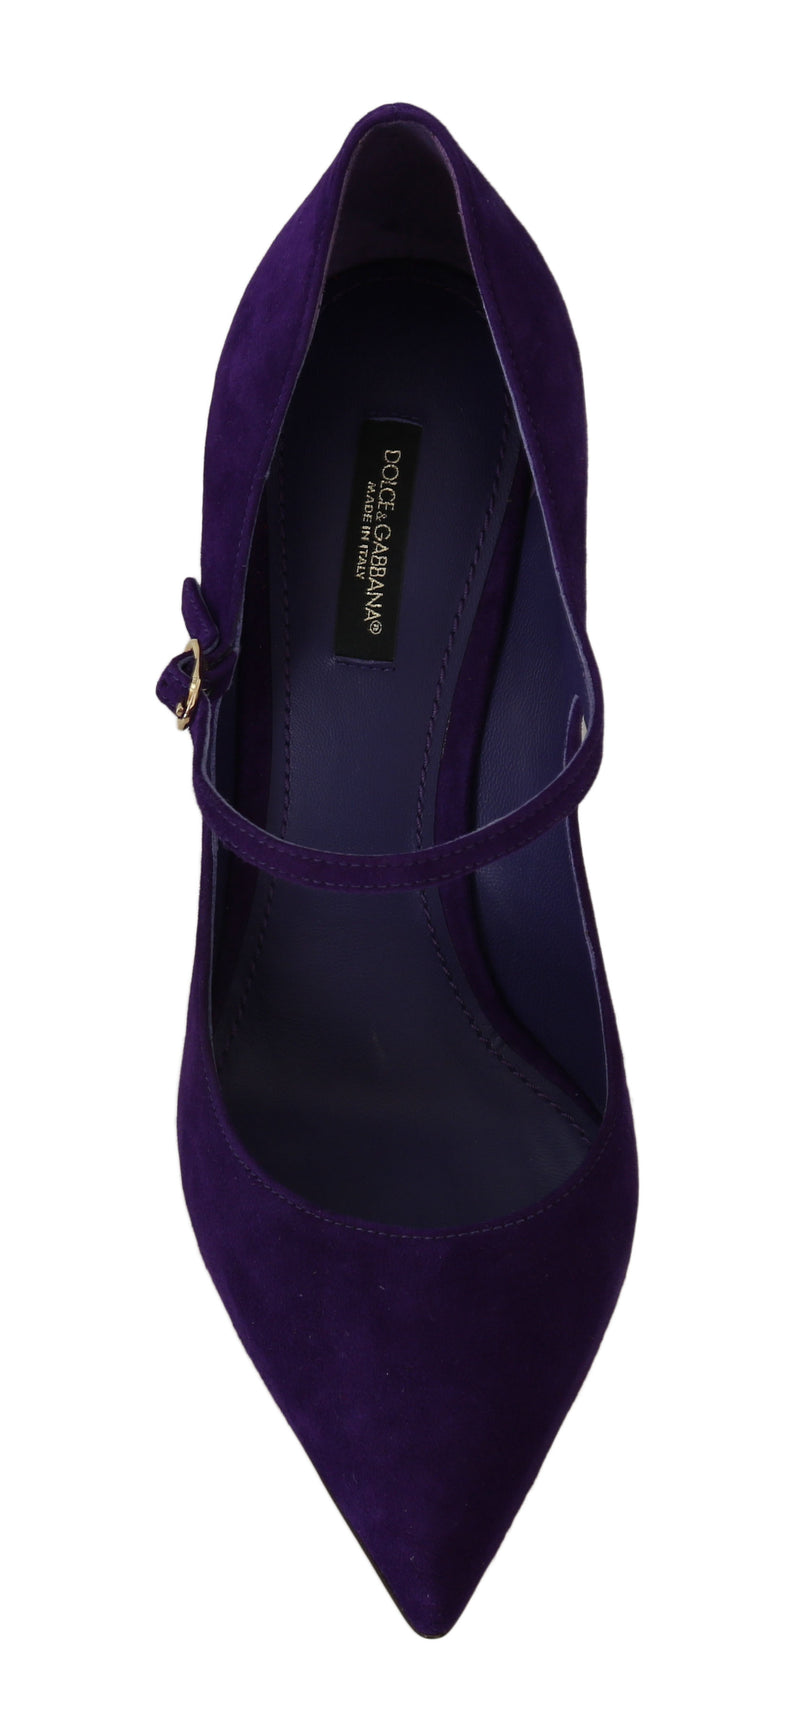 Purple Suede Mary Janes Pumps